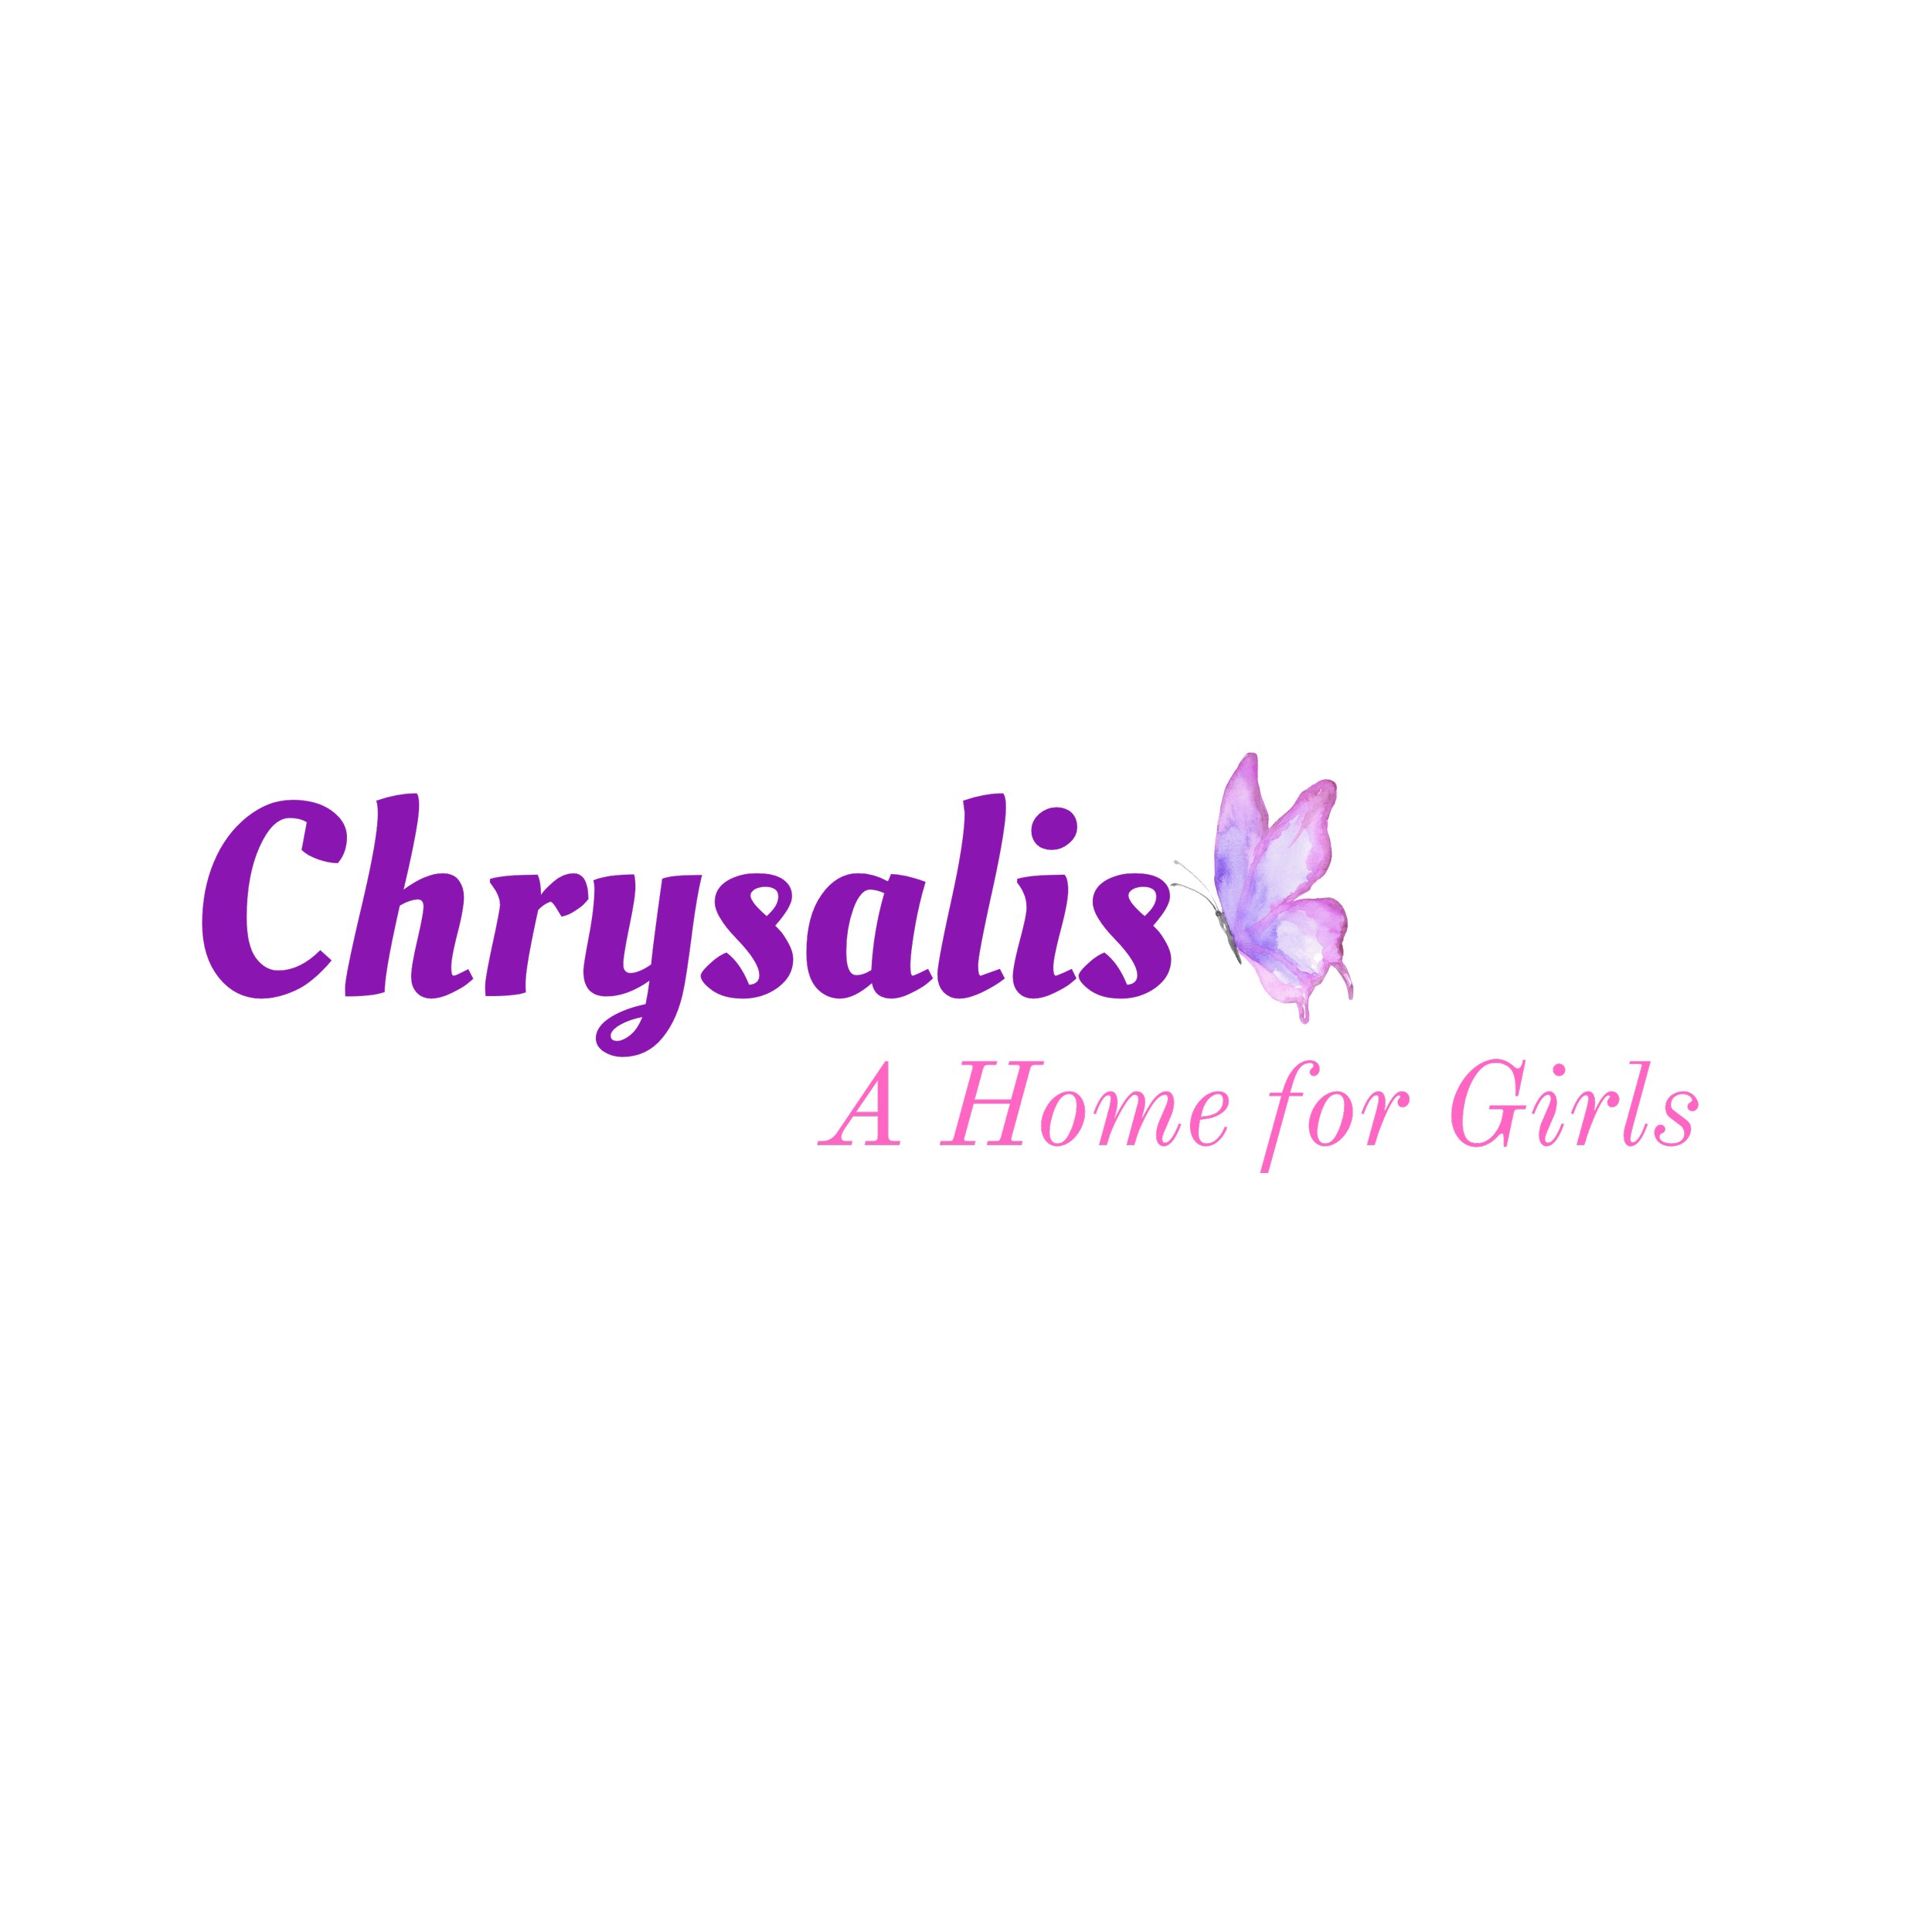 Chrysalis, A Home for Girls